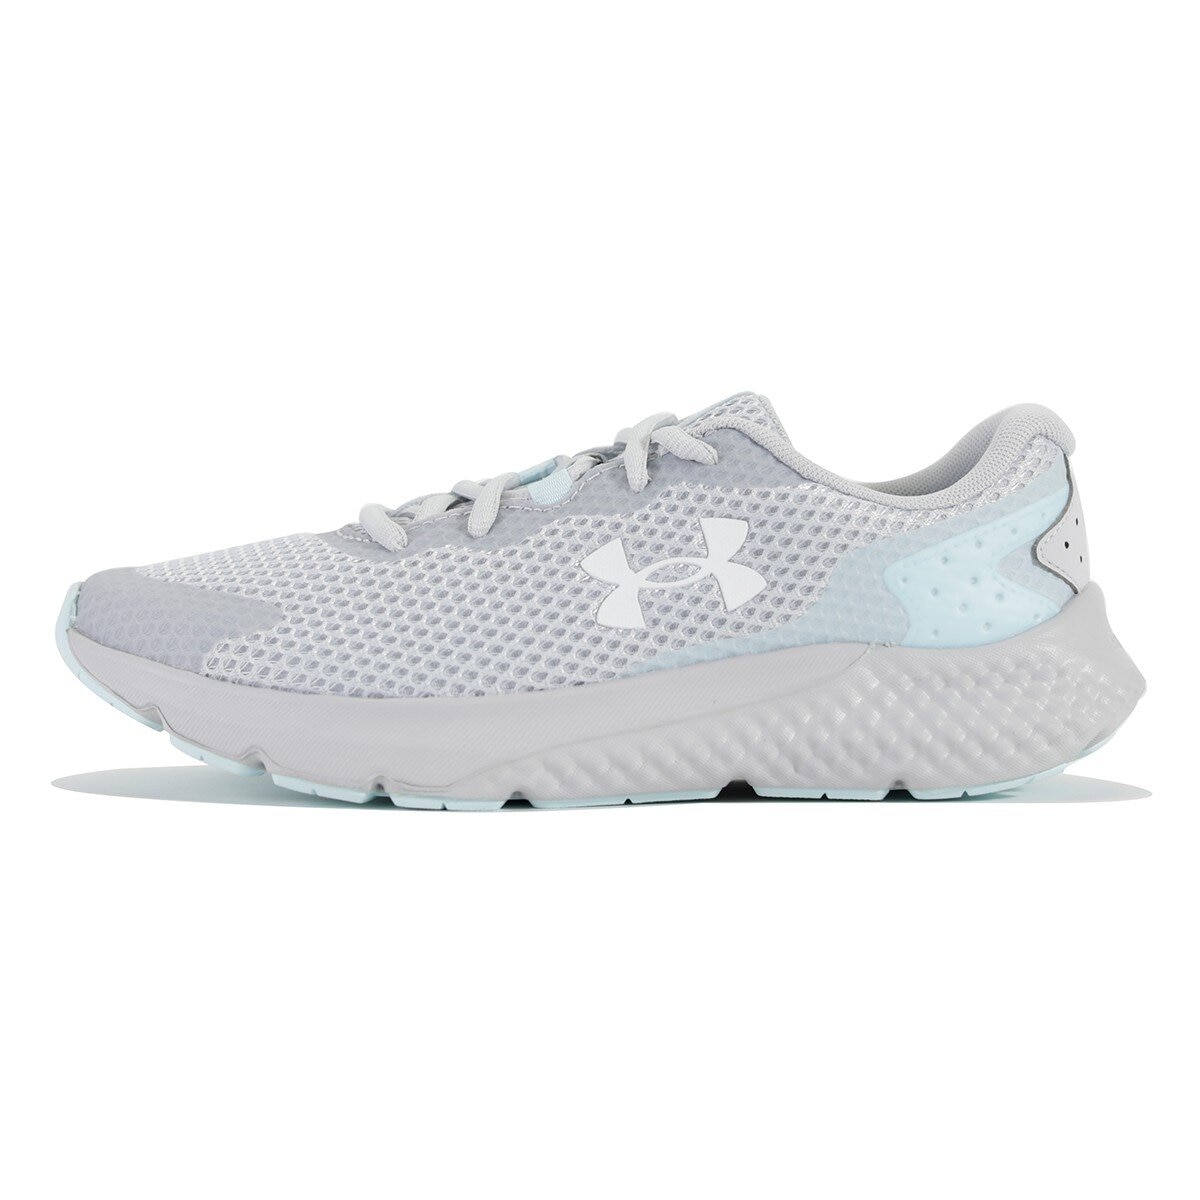 Under Armour 女 Charged Rogue 3 慢跑鞋 灰